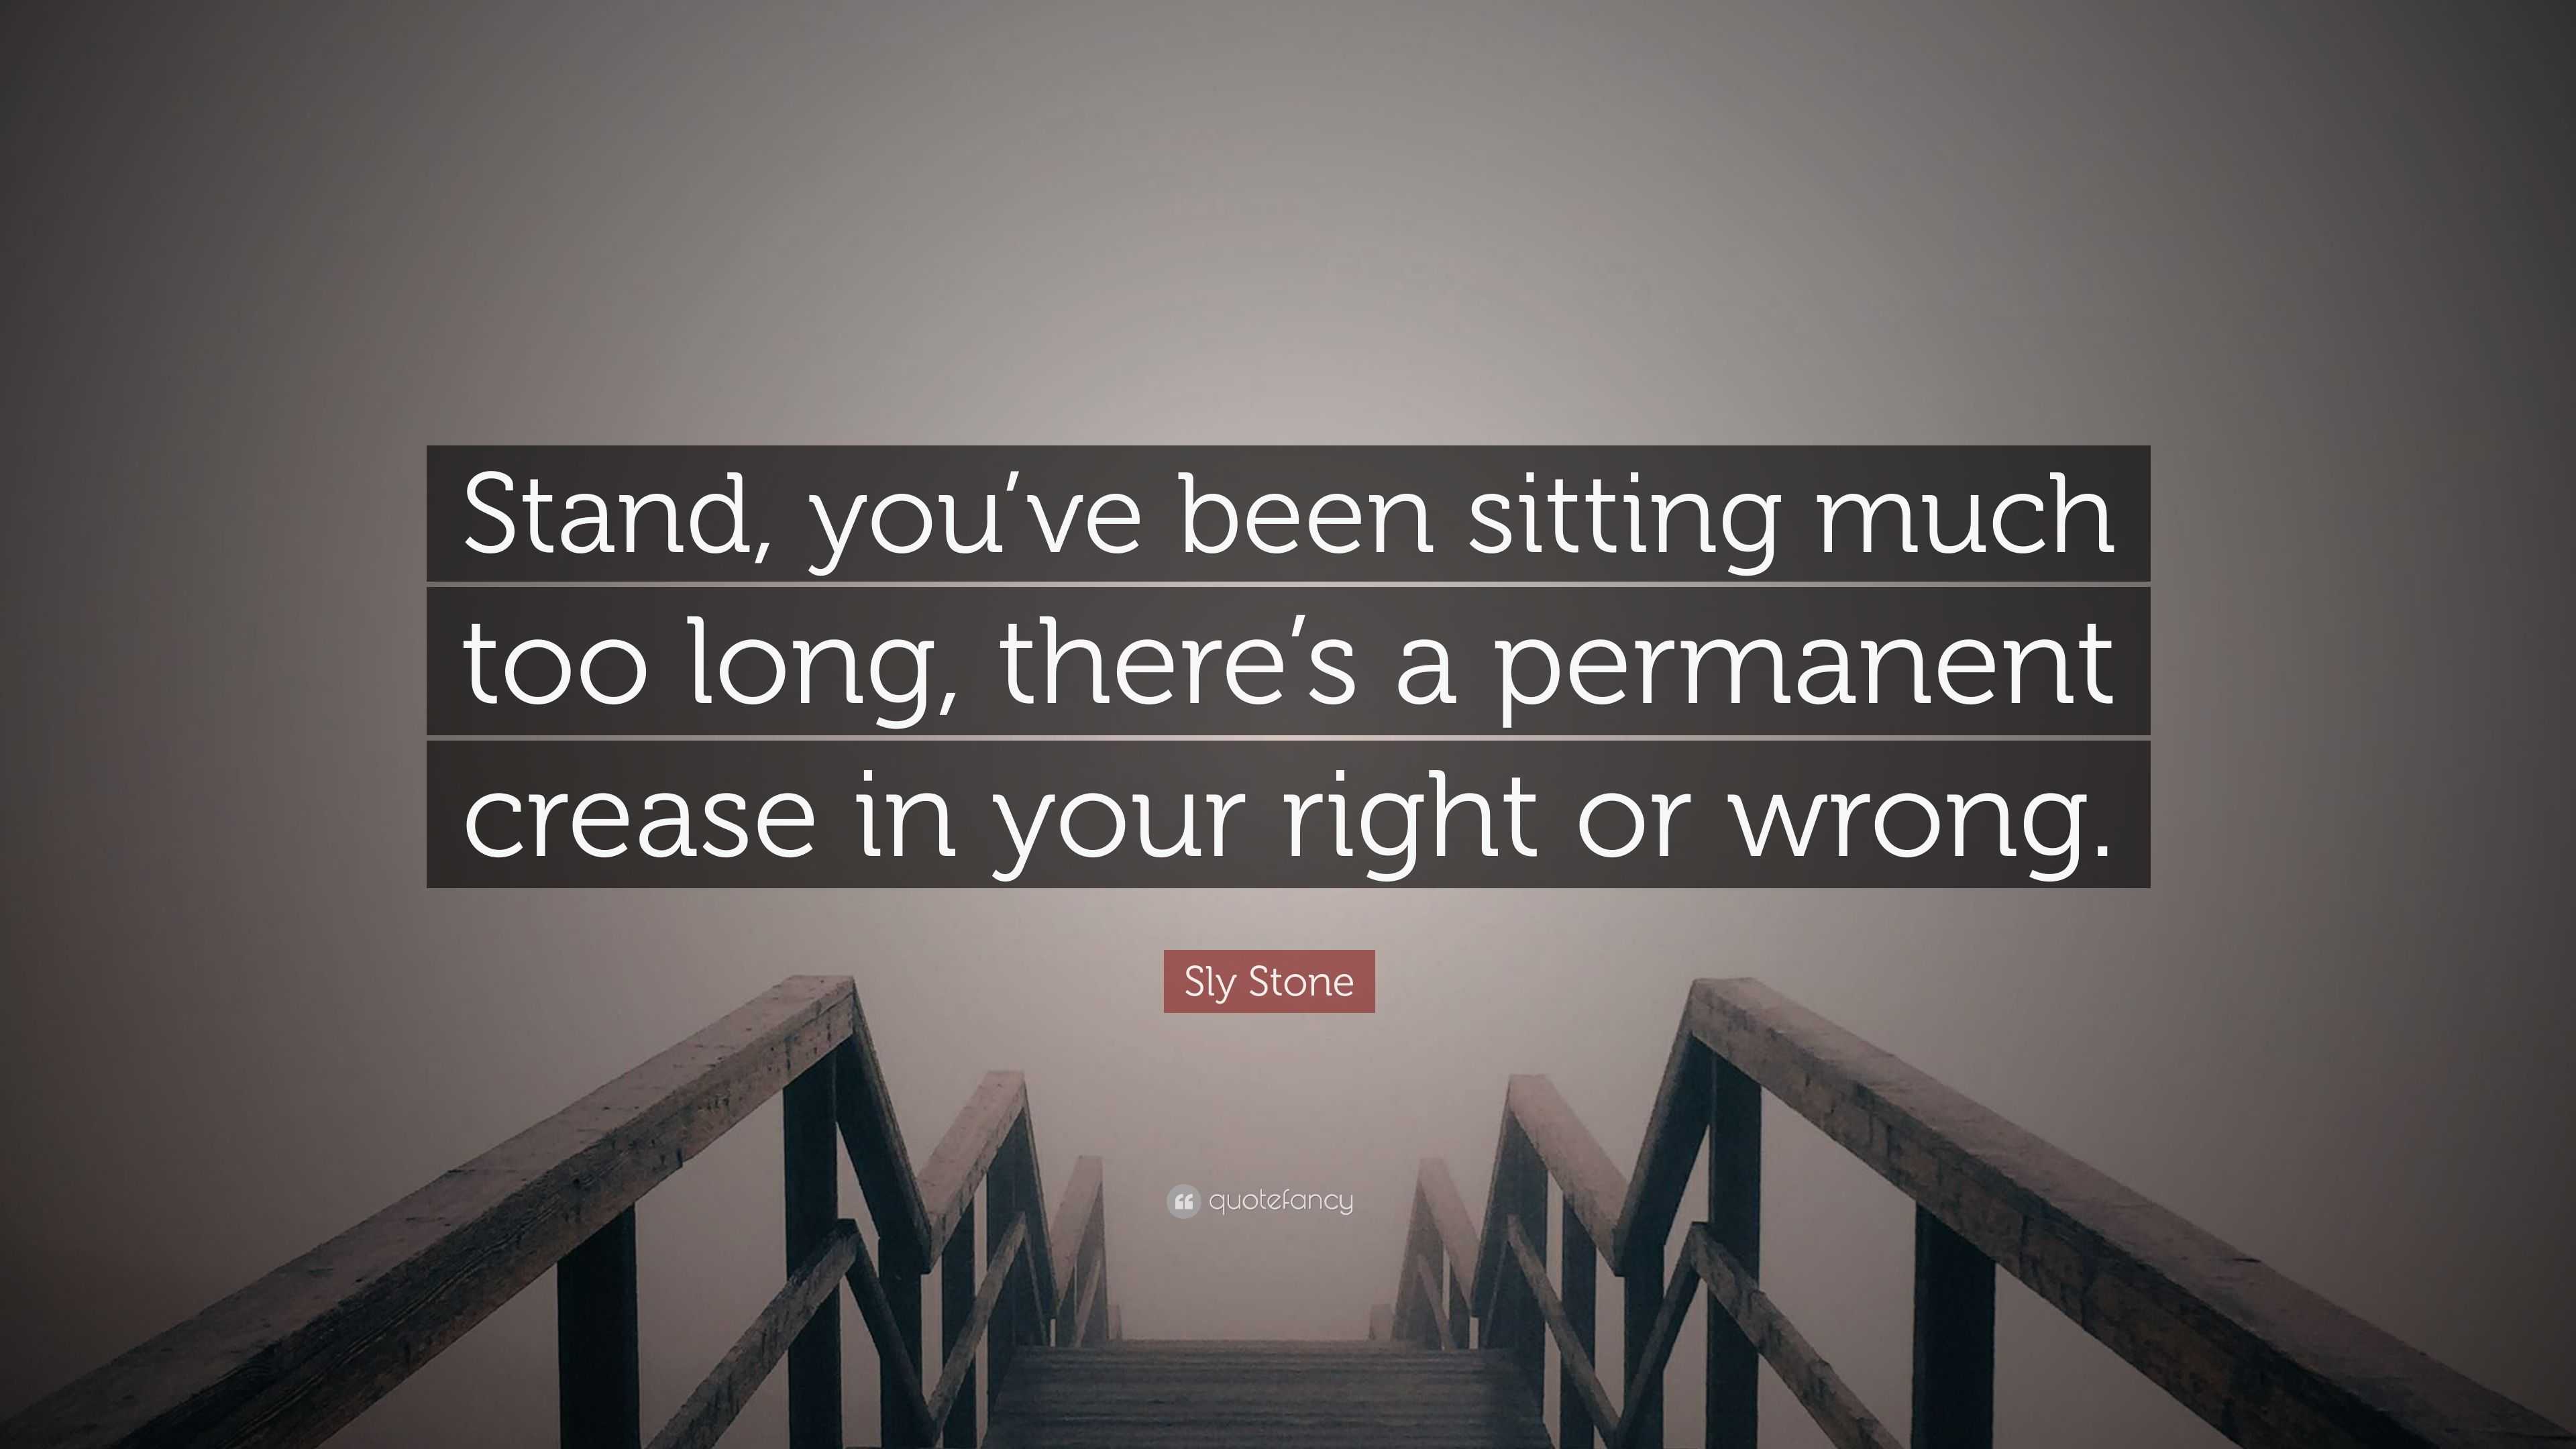 How Long Have You Been Standing Wrong?